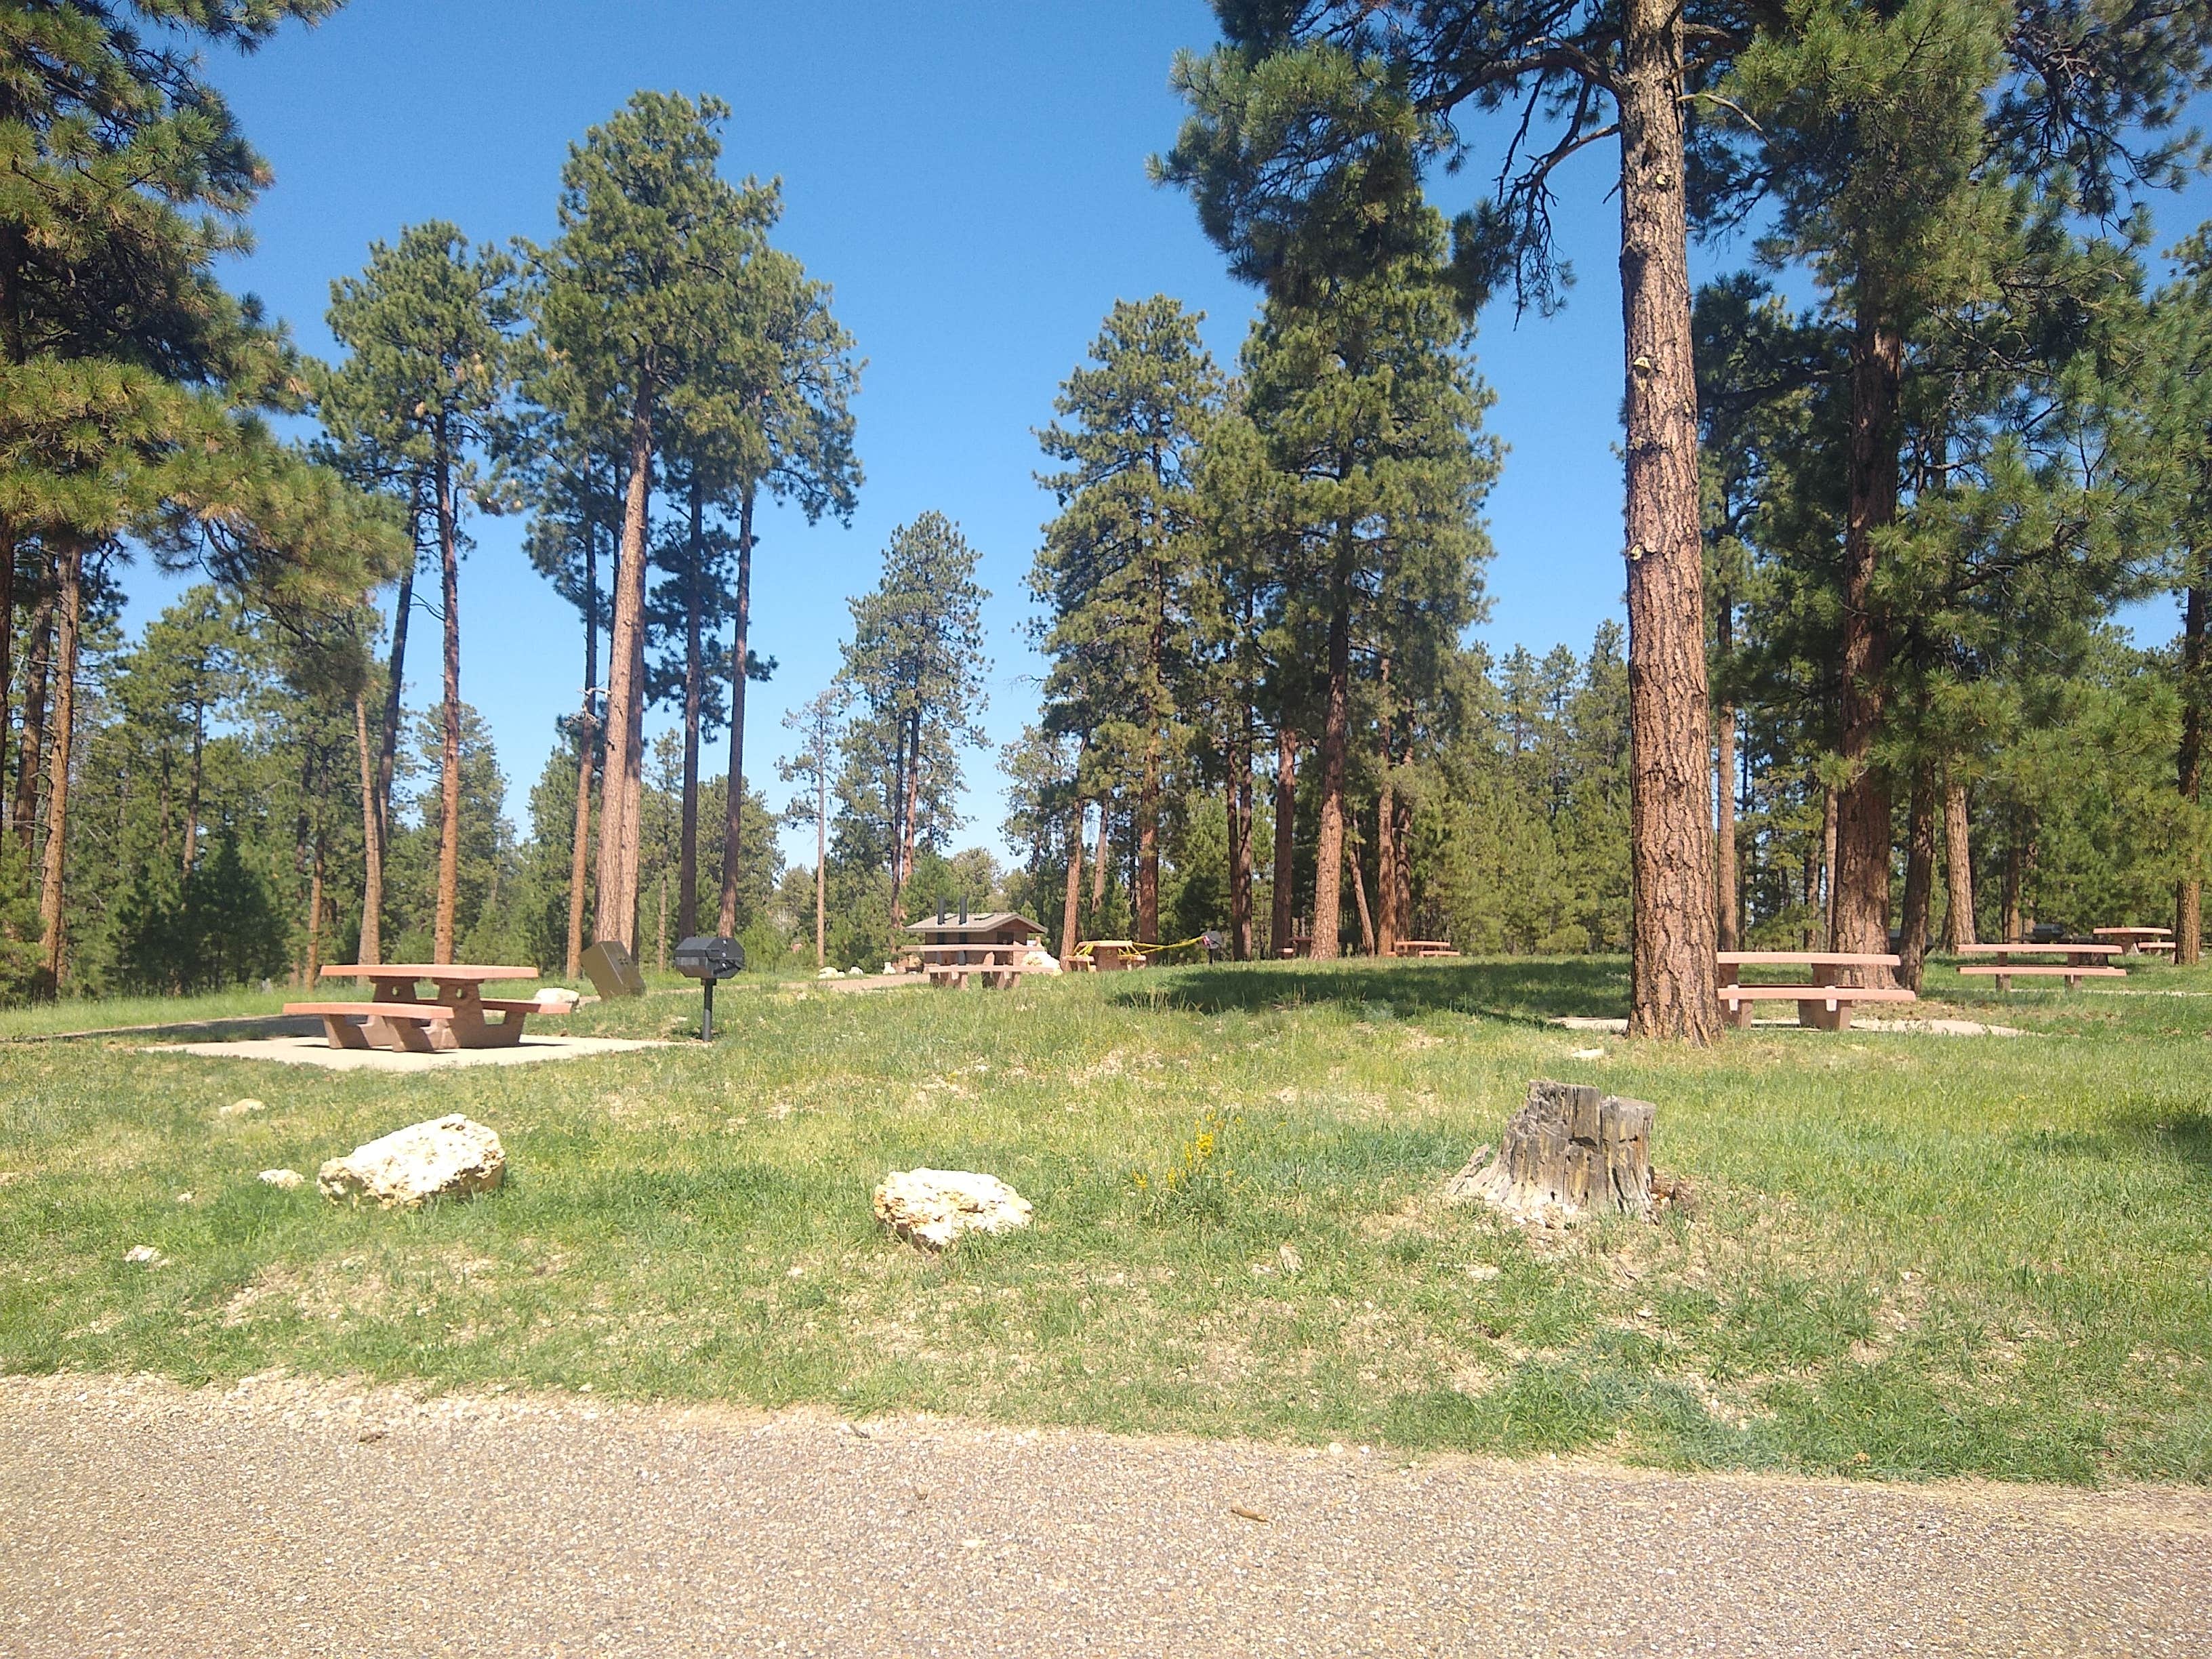 Camper submitted image from Jacob Lake Group Campground and Picnic Area - 2